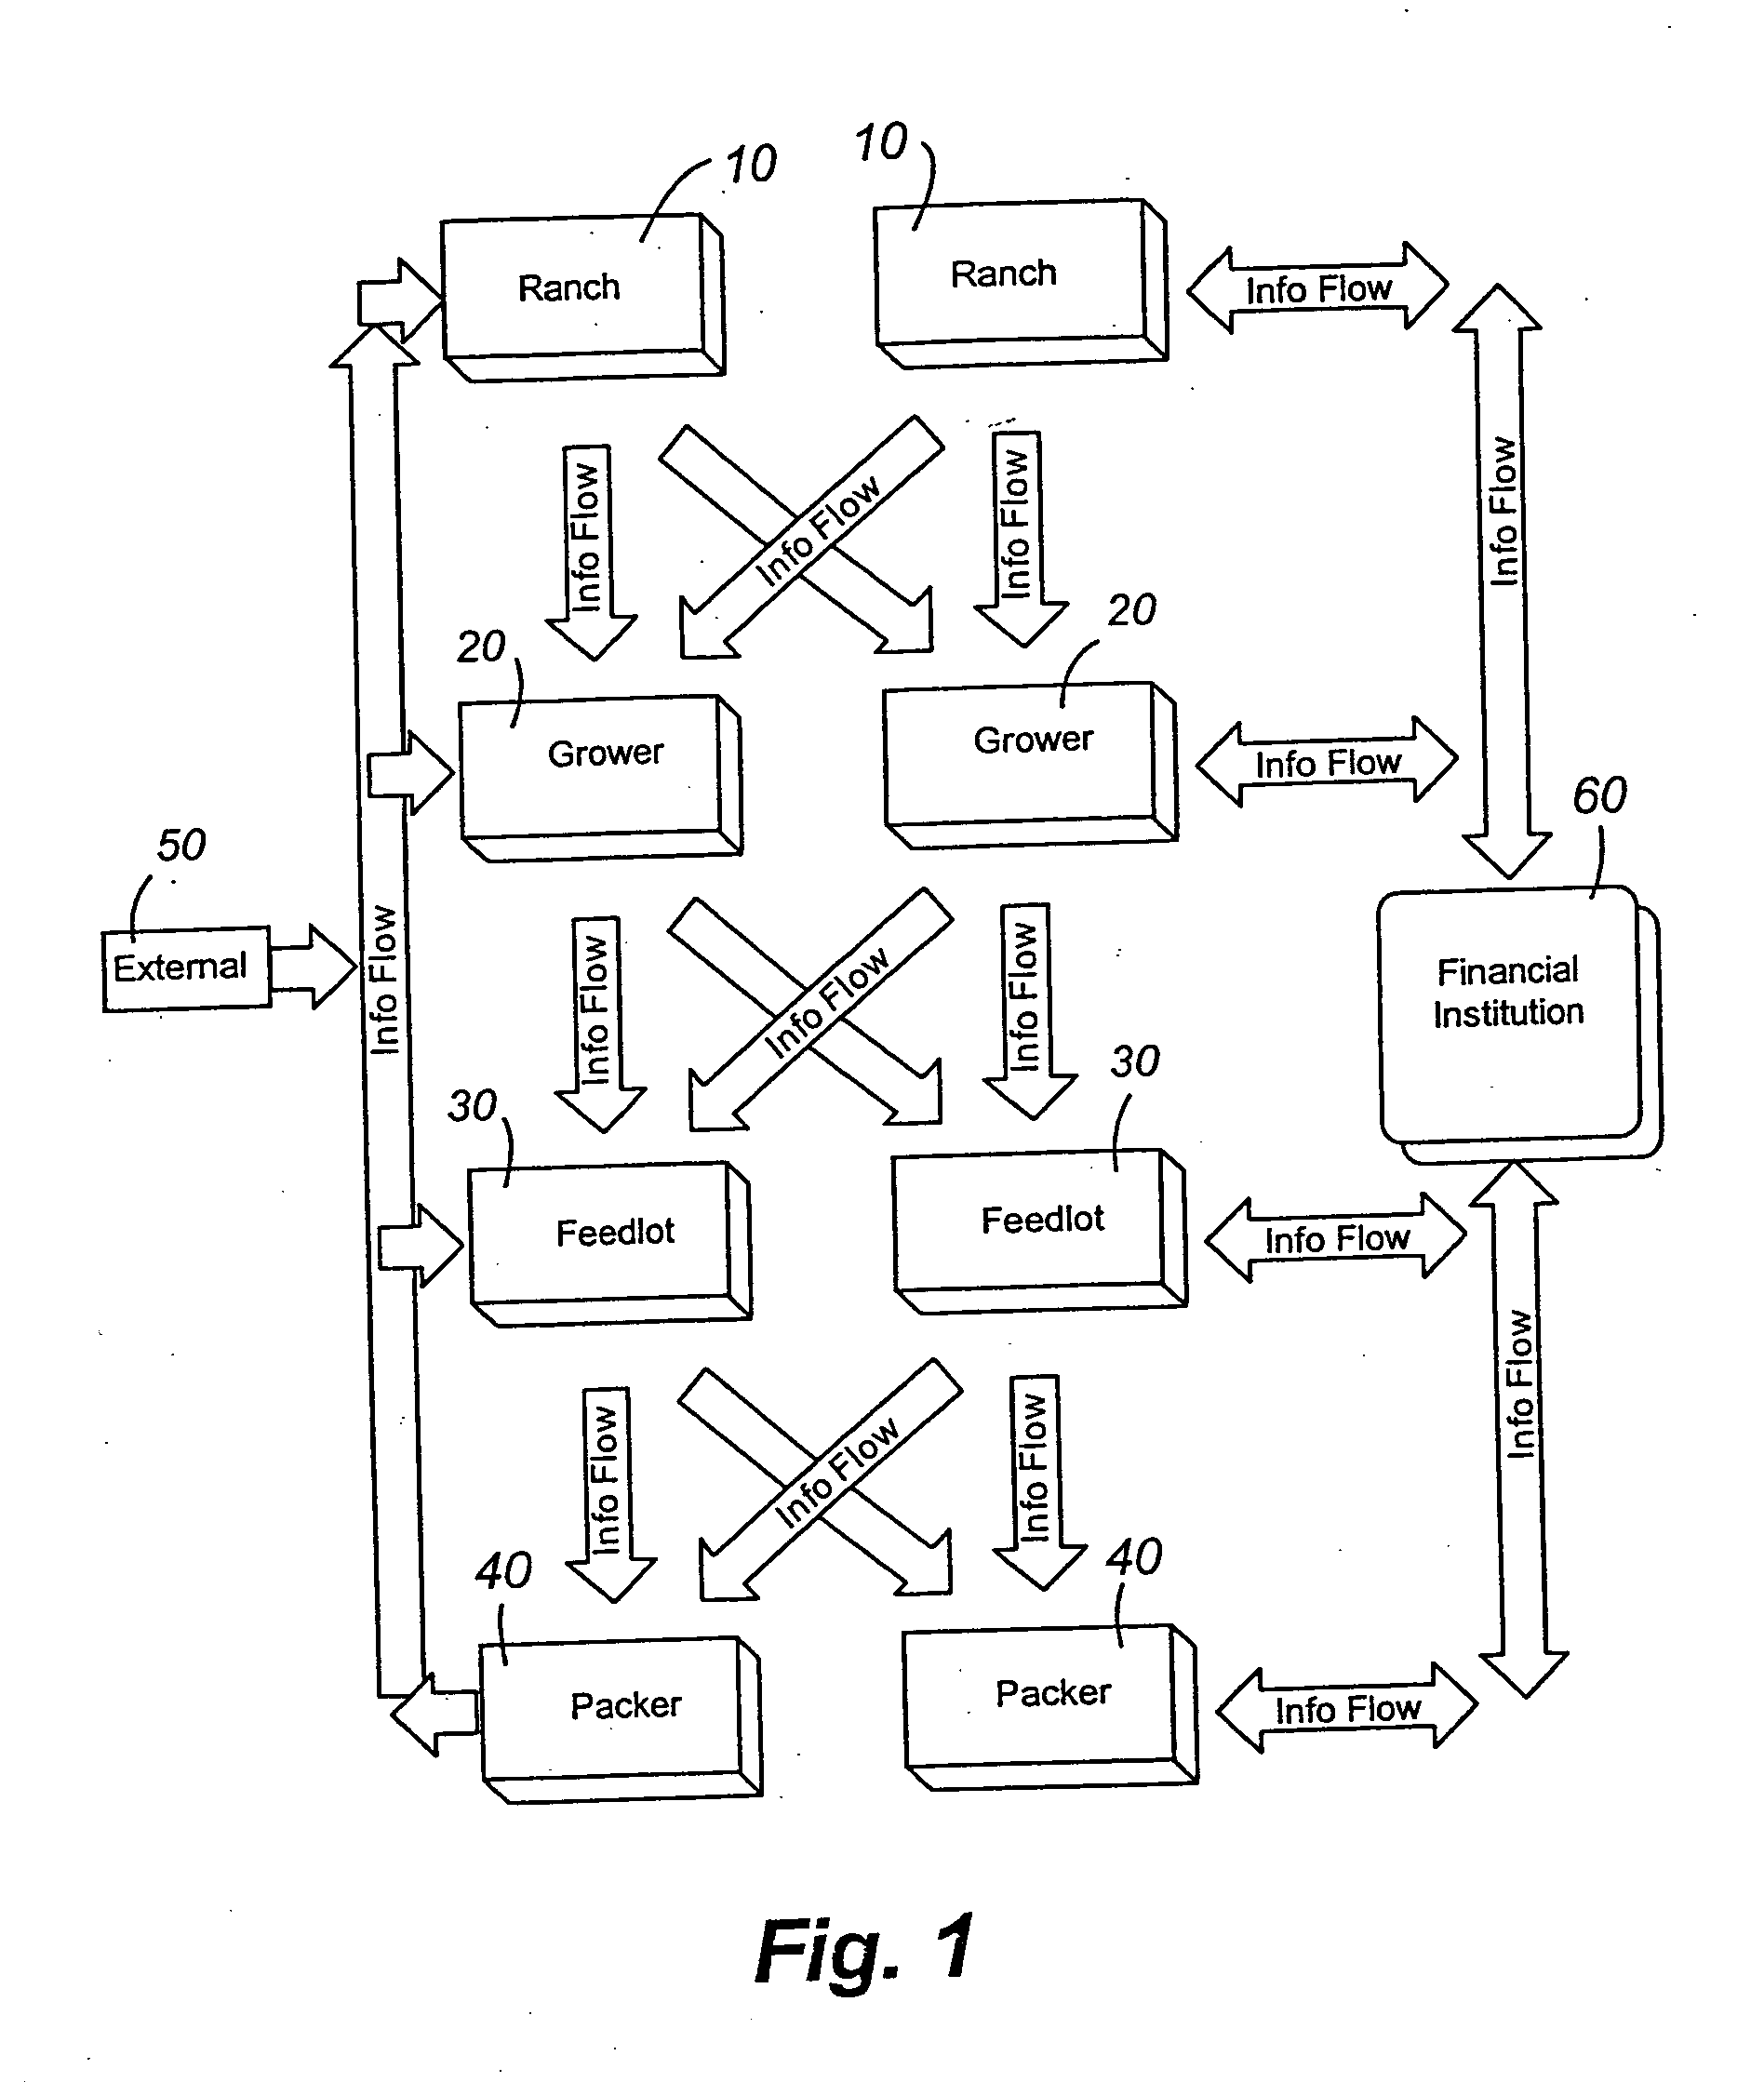 Cattle management system and method